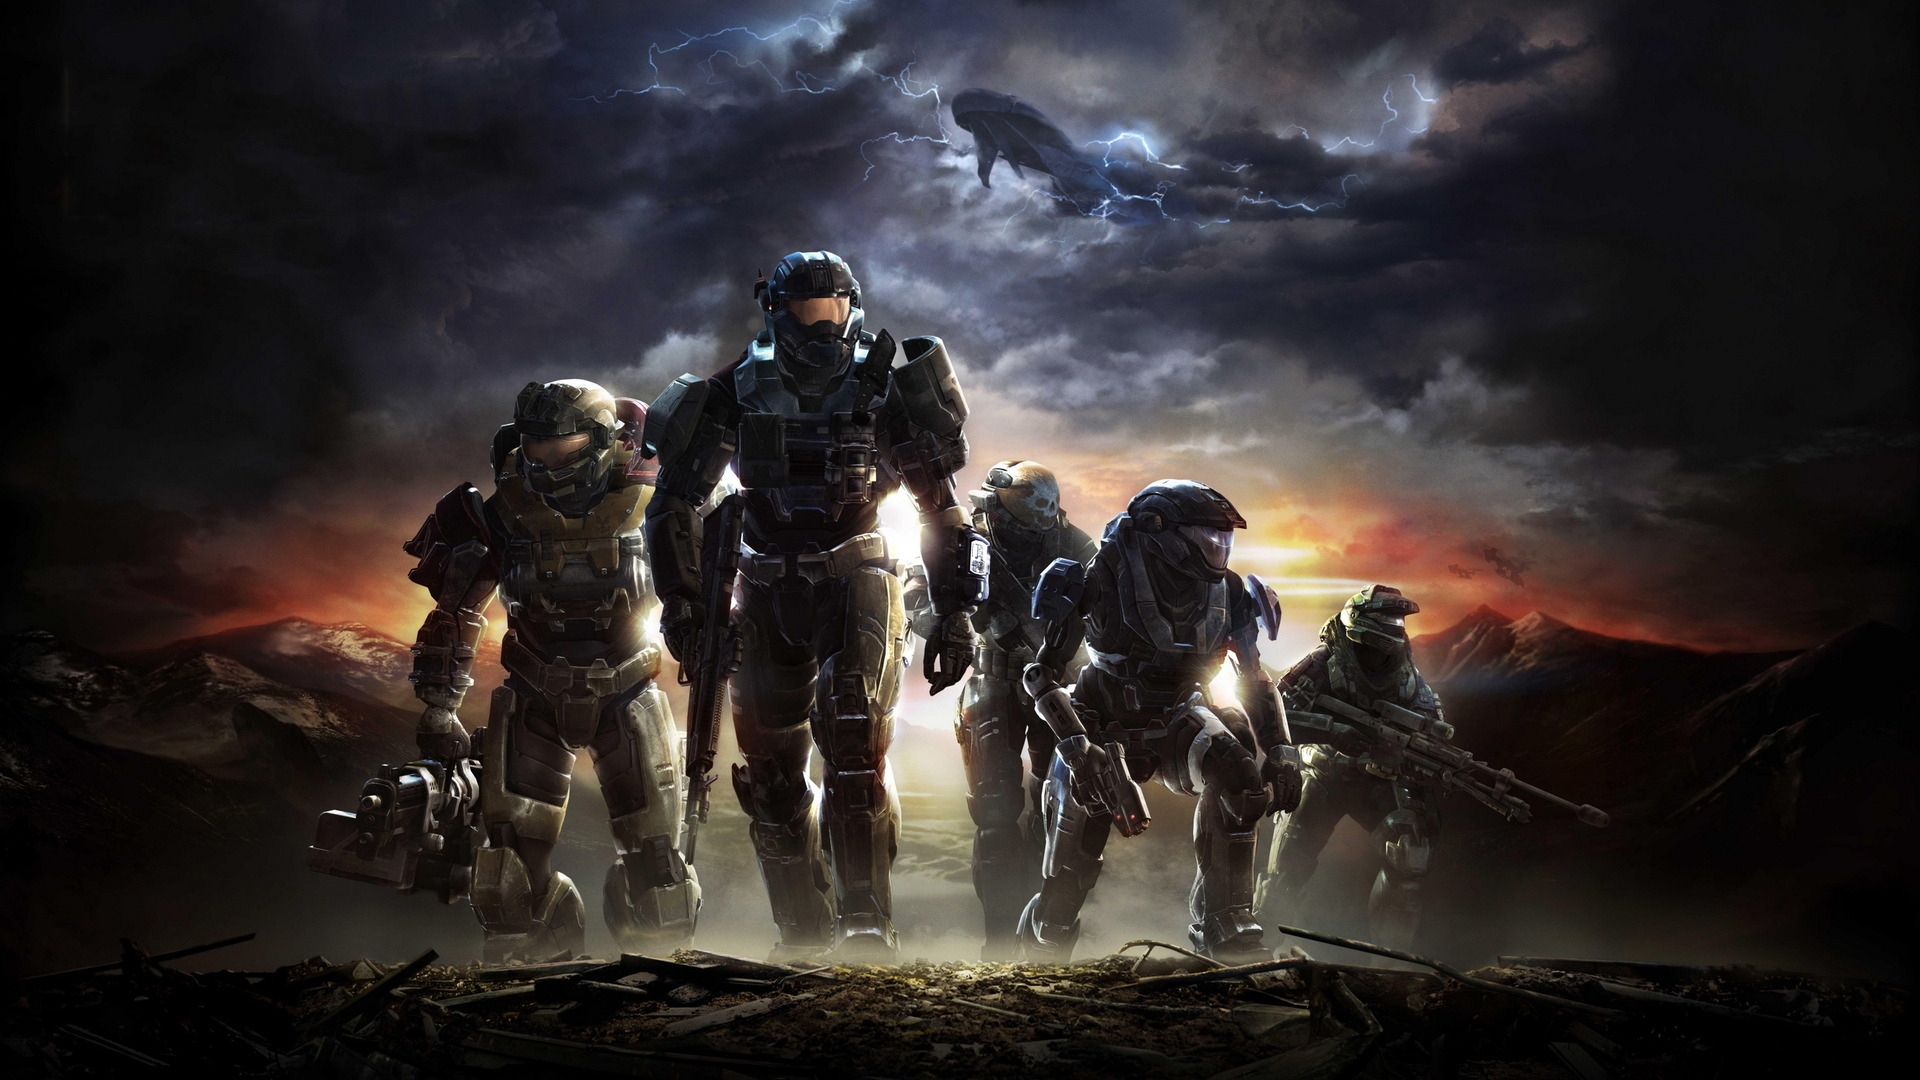 Halo Reach for 1920 x 1080 HDTV 1080p resolution